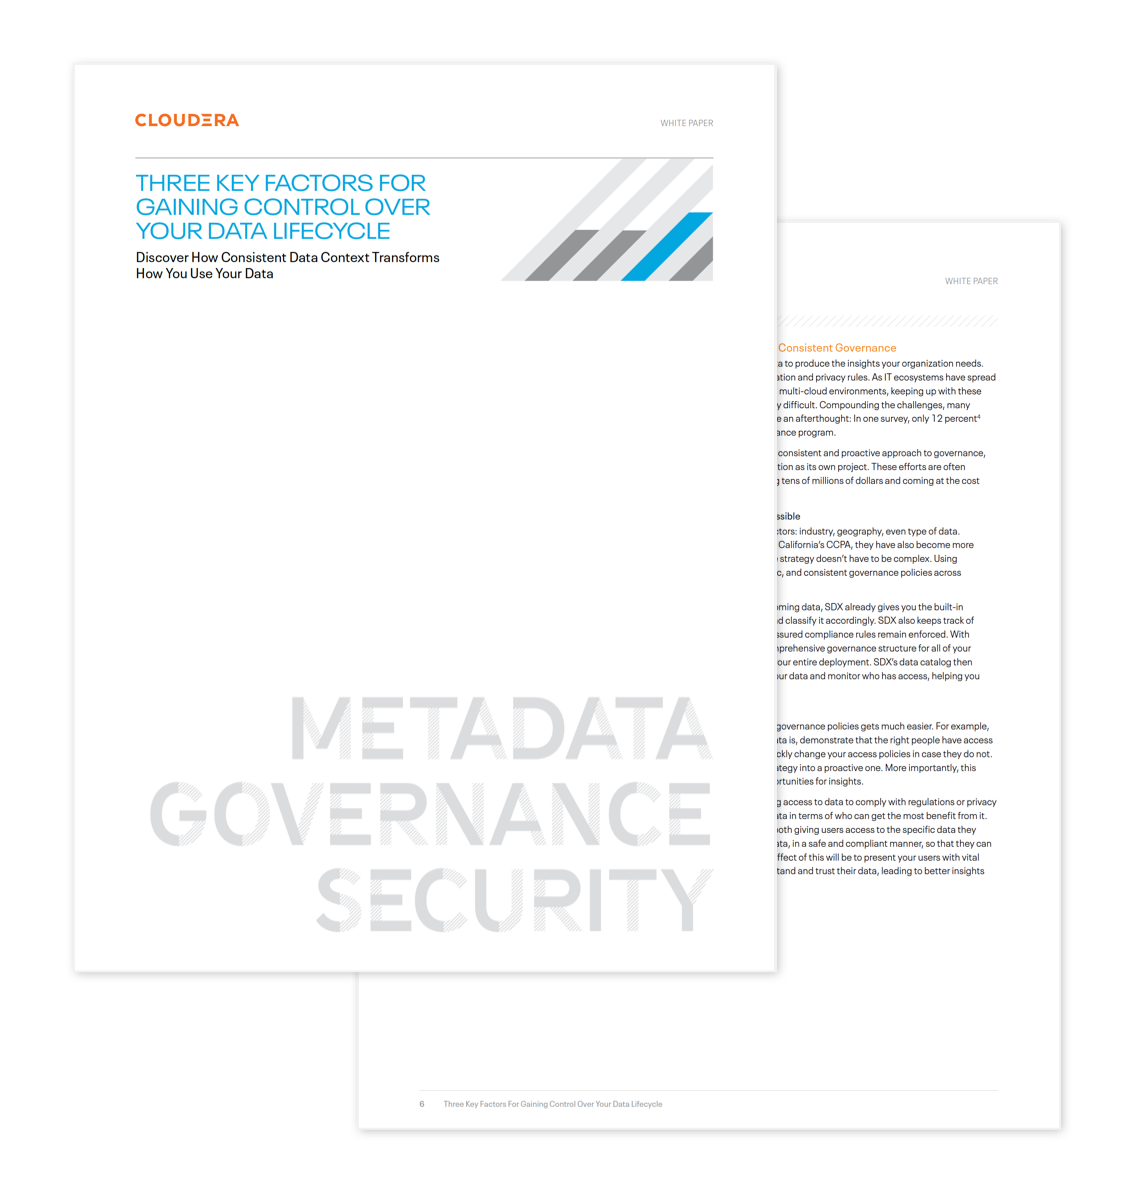 Thumbnail of Whitepaper: Three Key Factors for Gaining Control Over Your Data Lifecycle